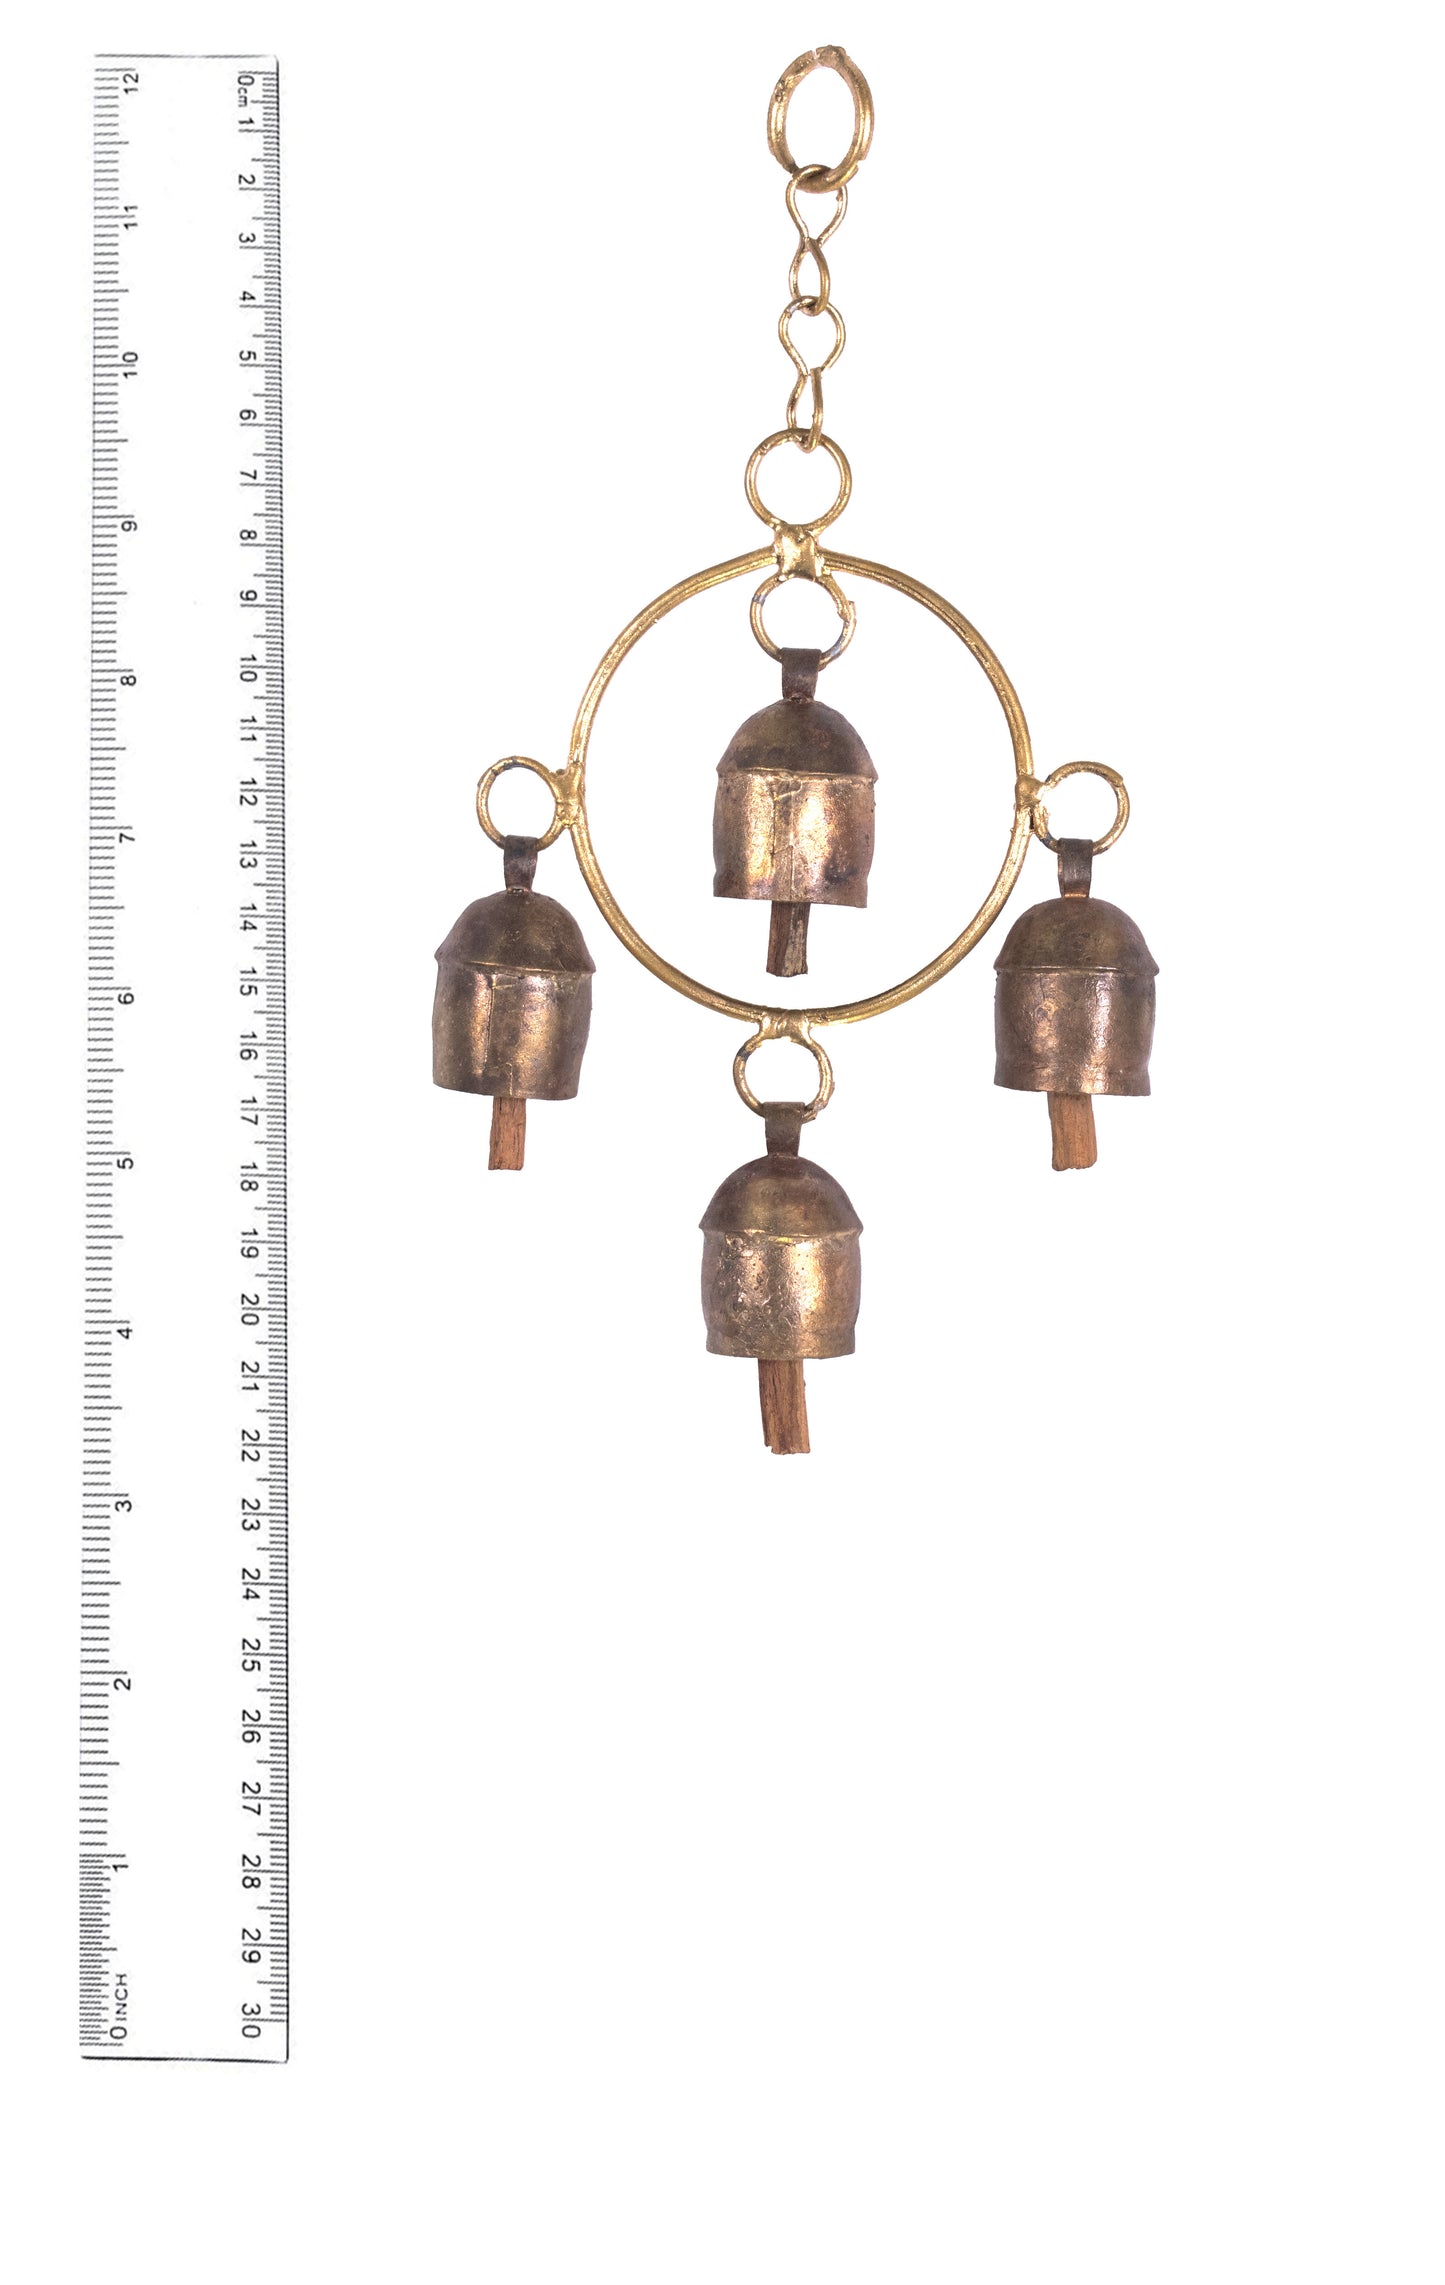 Hand Made Metal Bells Wrought Iron Copper-Zinc Coated Home Décor Chimes Cow Bell   - Rings 3D - 2 Bells  -  SKU: 0086